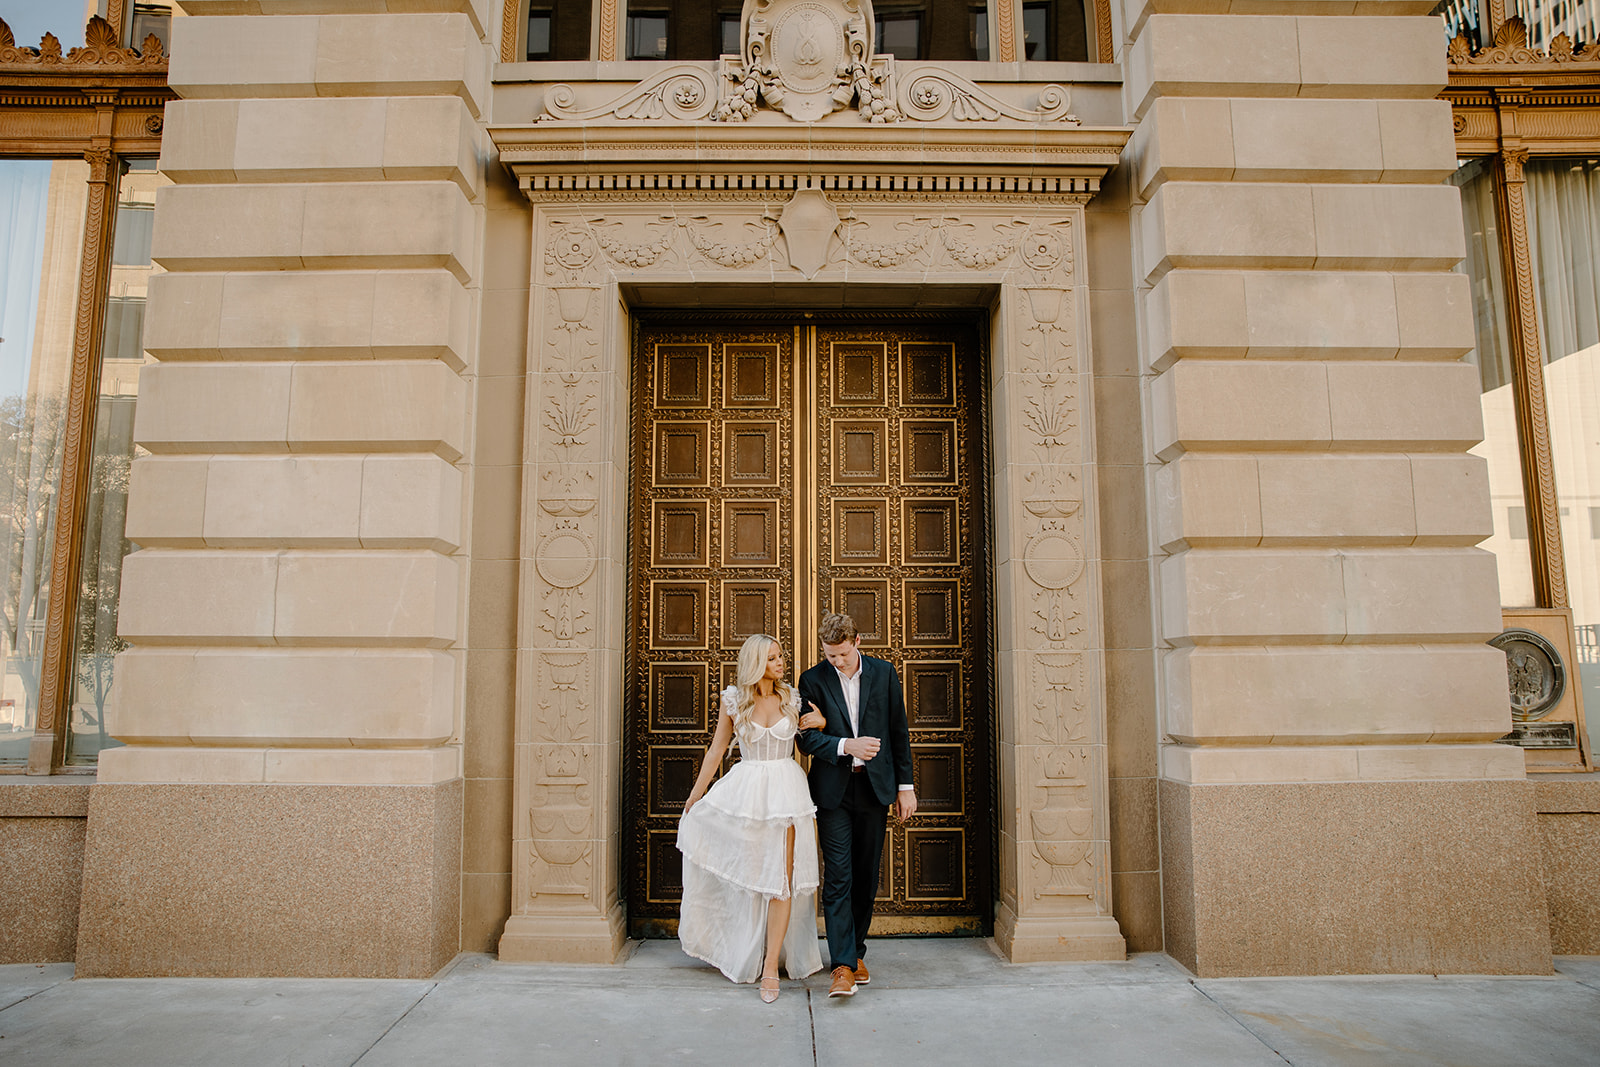 engaged couple standing in front of historic building doors